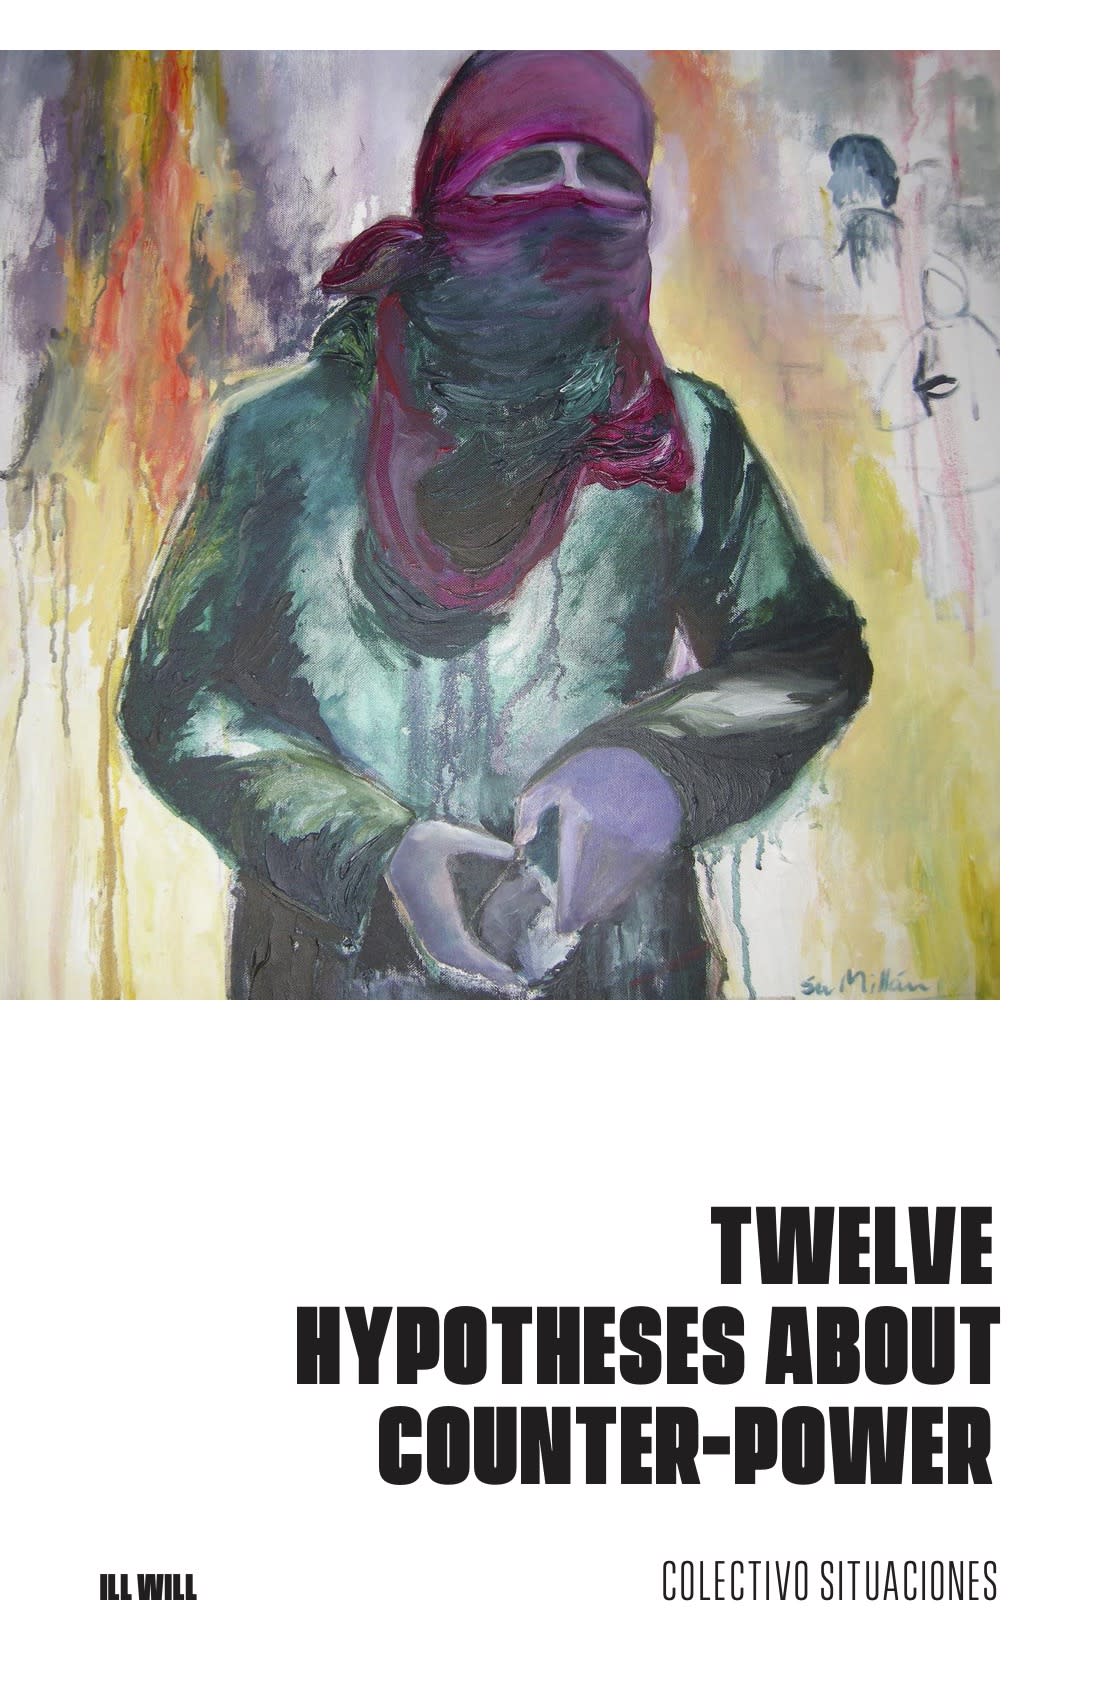 Cover Image for Twelve Hypotheses about Counter-power